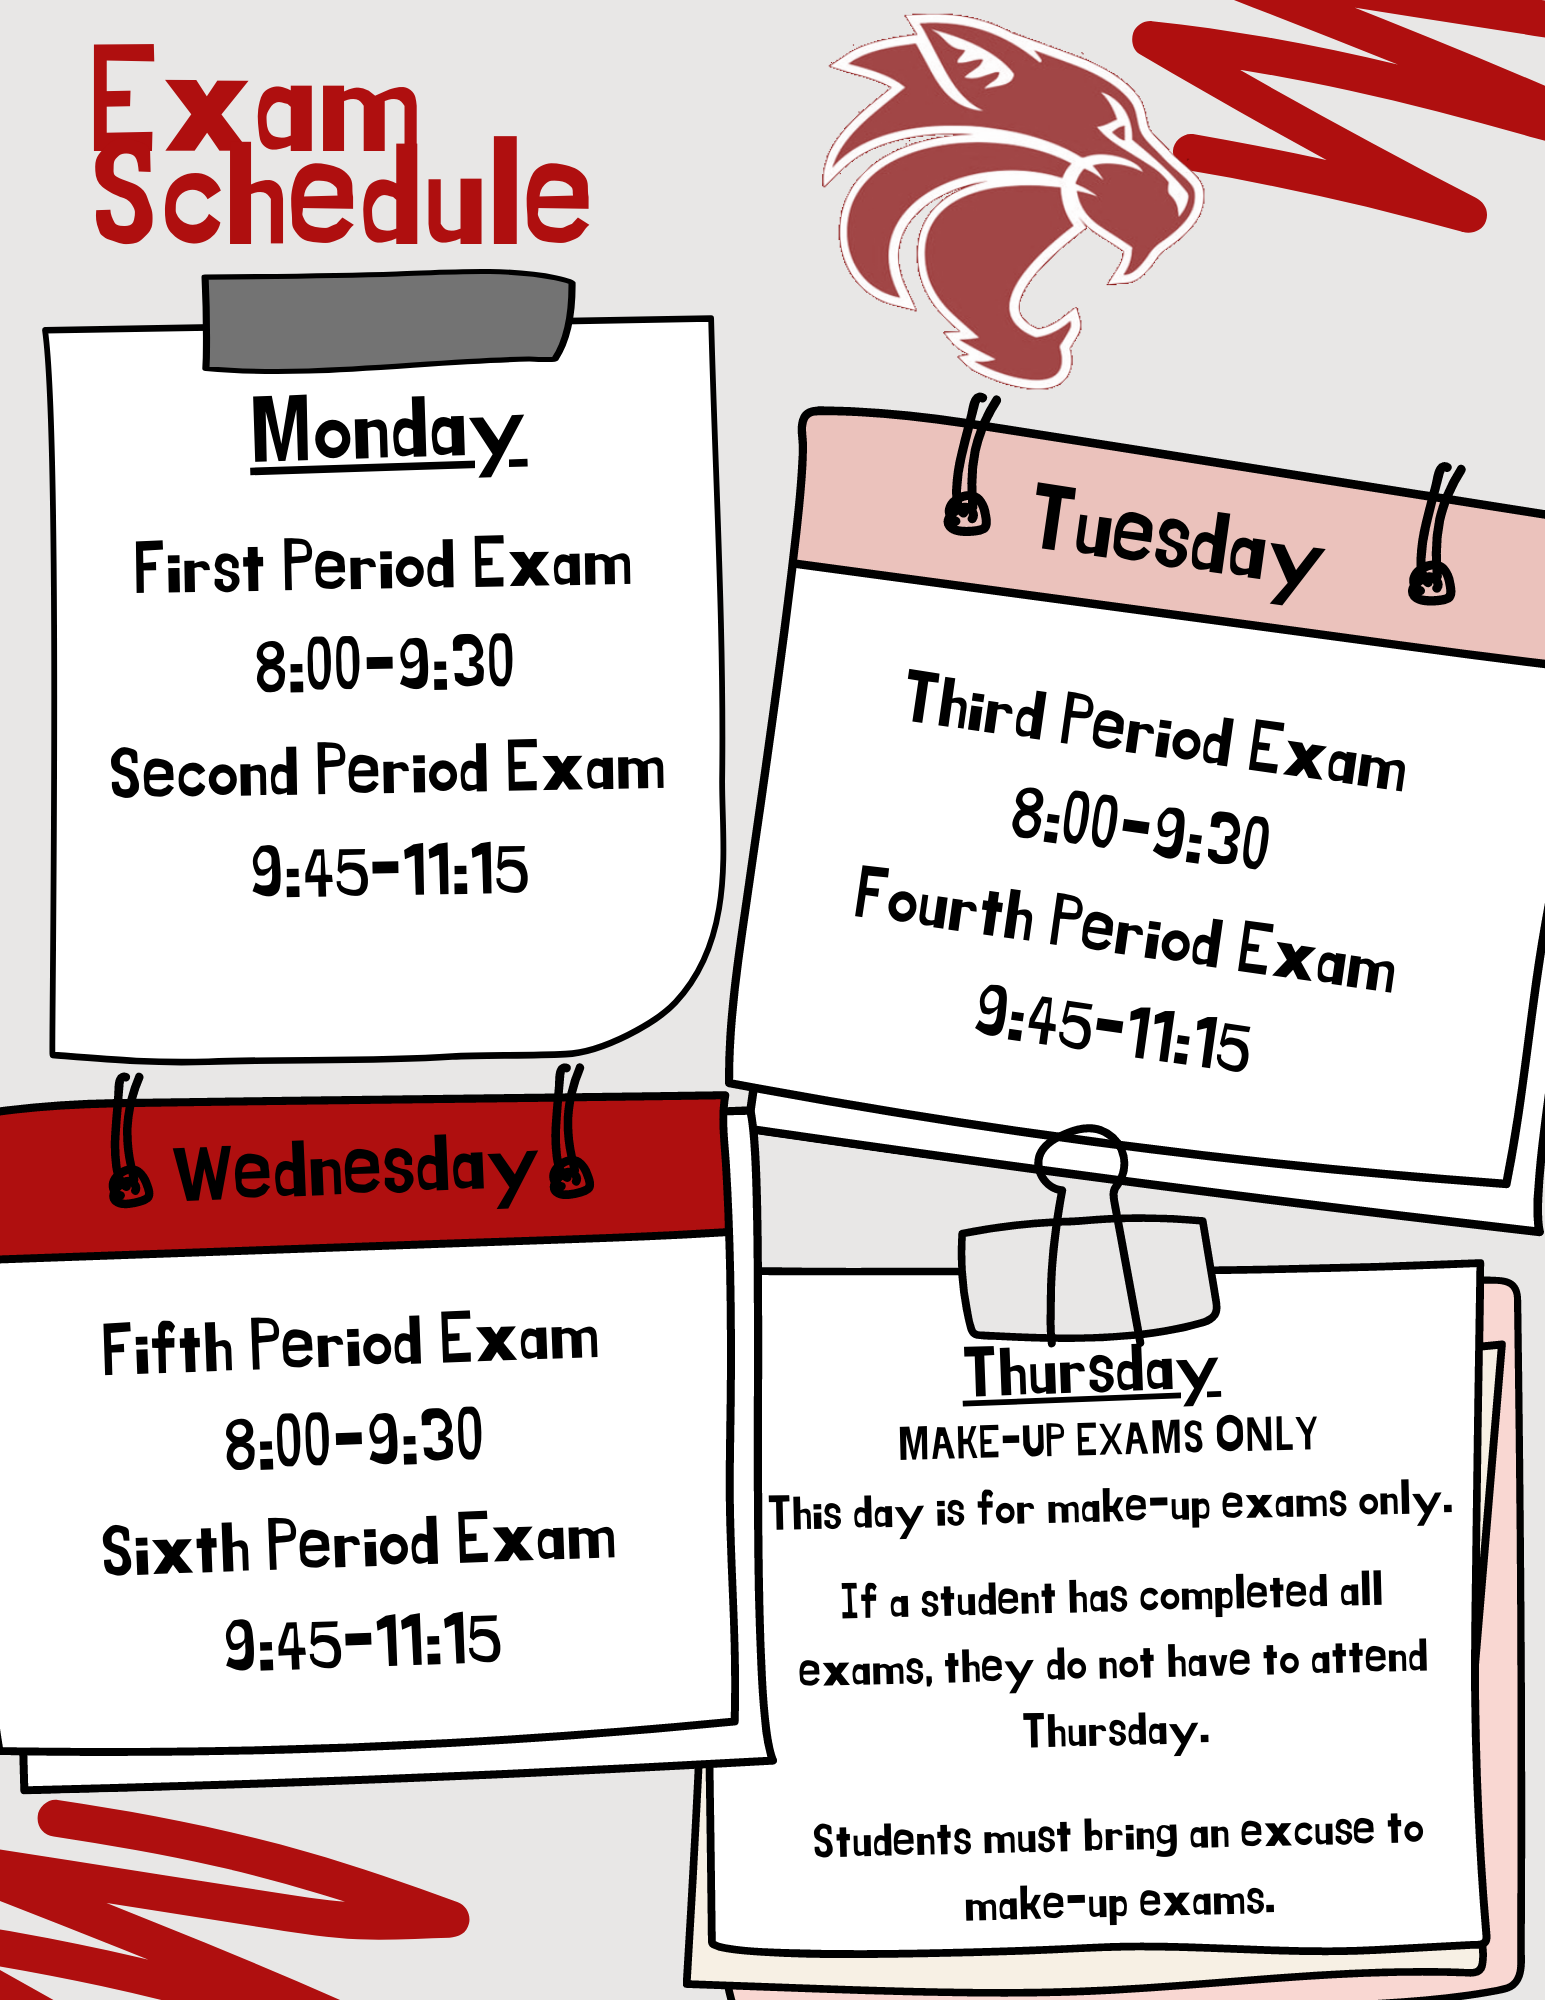 Exam Schedule Monday first period 8:00-9:30 second period 9:45-11:15, Tuesday 3rd period 8:00-9:30 4th period 9:45-11:15, Wednesday 5th period 9:00-9:30 6th period 9:45-11:15, Thursday is makeup exams only. If a student has completed all exams, they do not have to come.  Students must bring an excuse to make up exams. More info regarding exams checkouts was sent home with students. Exams count 20% of final grade